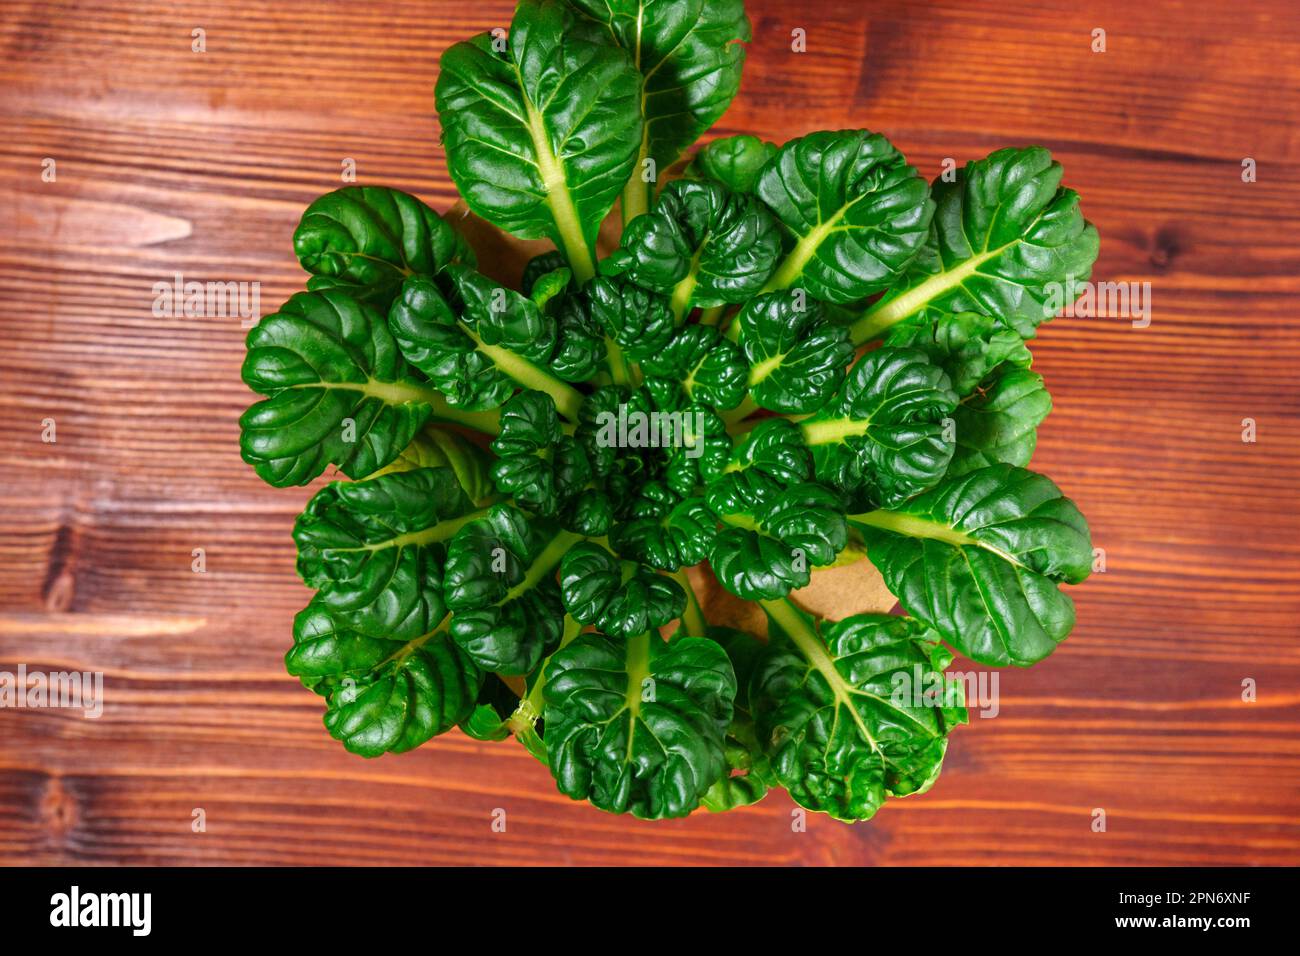 Tatsoi is an Asian variety of Brassica rapa grown for vegetables. Brassica rapa subsp. narinosa. Stock Photo